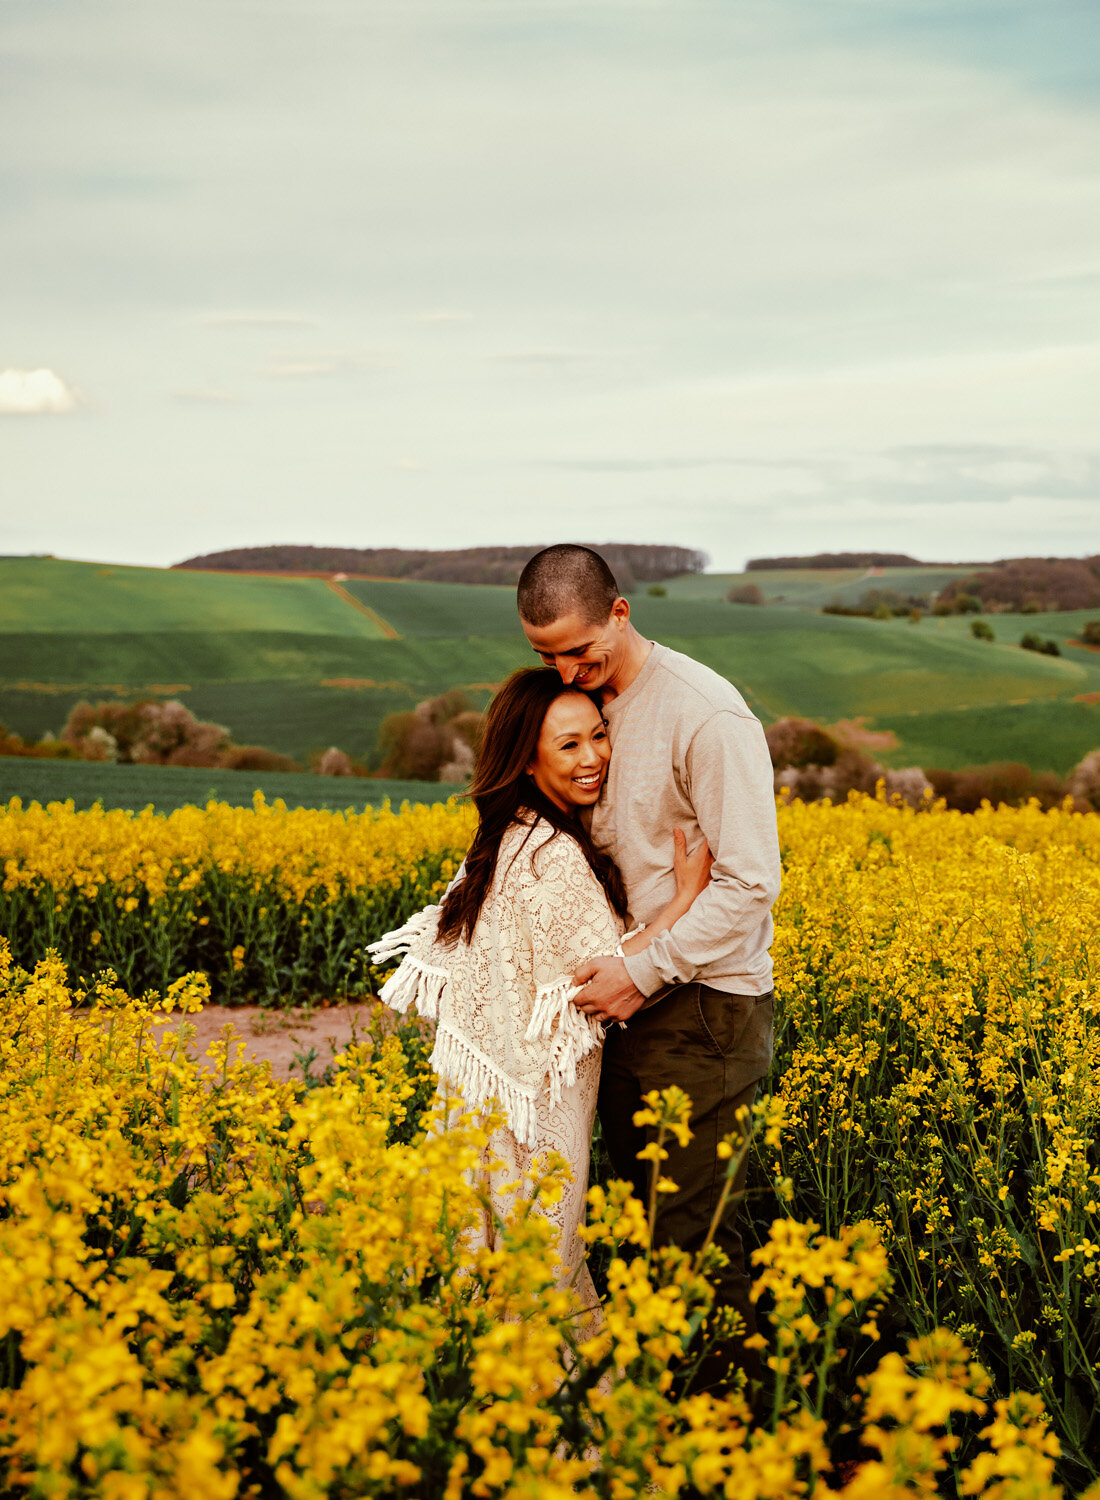  Beautiful Family with 2 small children in bohemian outfits playing in yellow rapeseed fields in Rheinland-Pfalz in the German country side. Lifestyle Family Photo Session by Sarah Havens, serving the Ramstein KMC and Kaiserslautern area. 